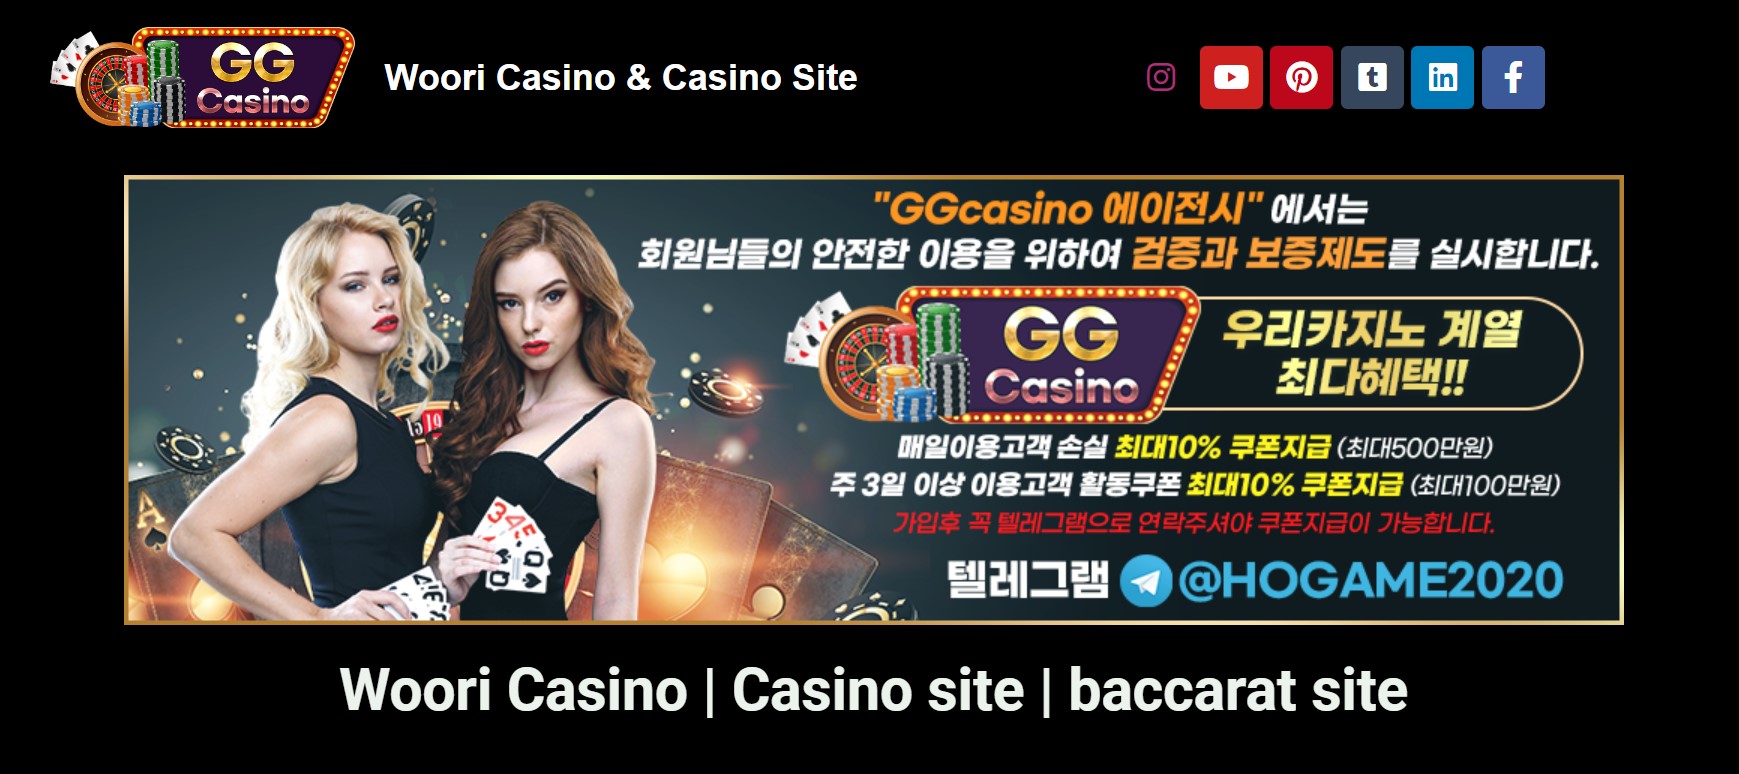 How to Choose an Online Casino Site